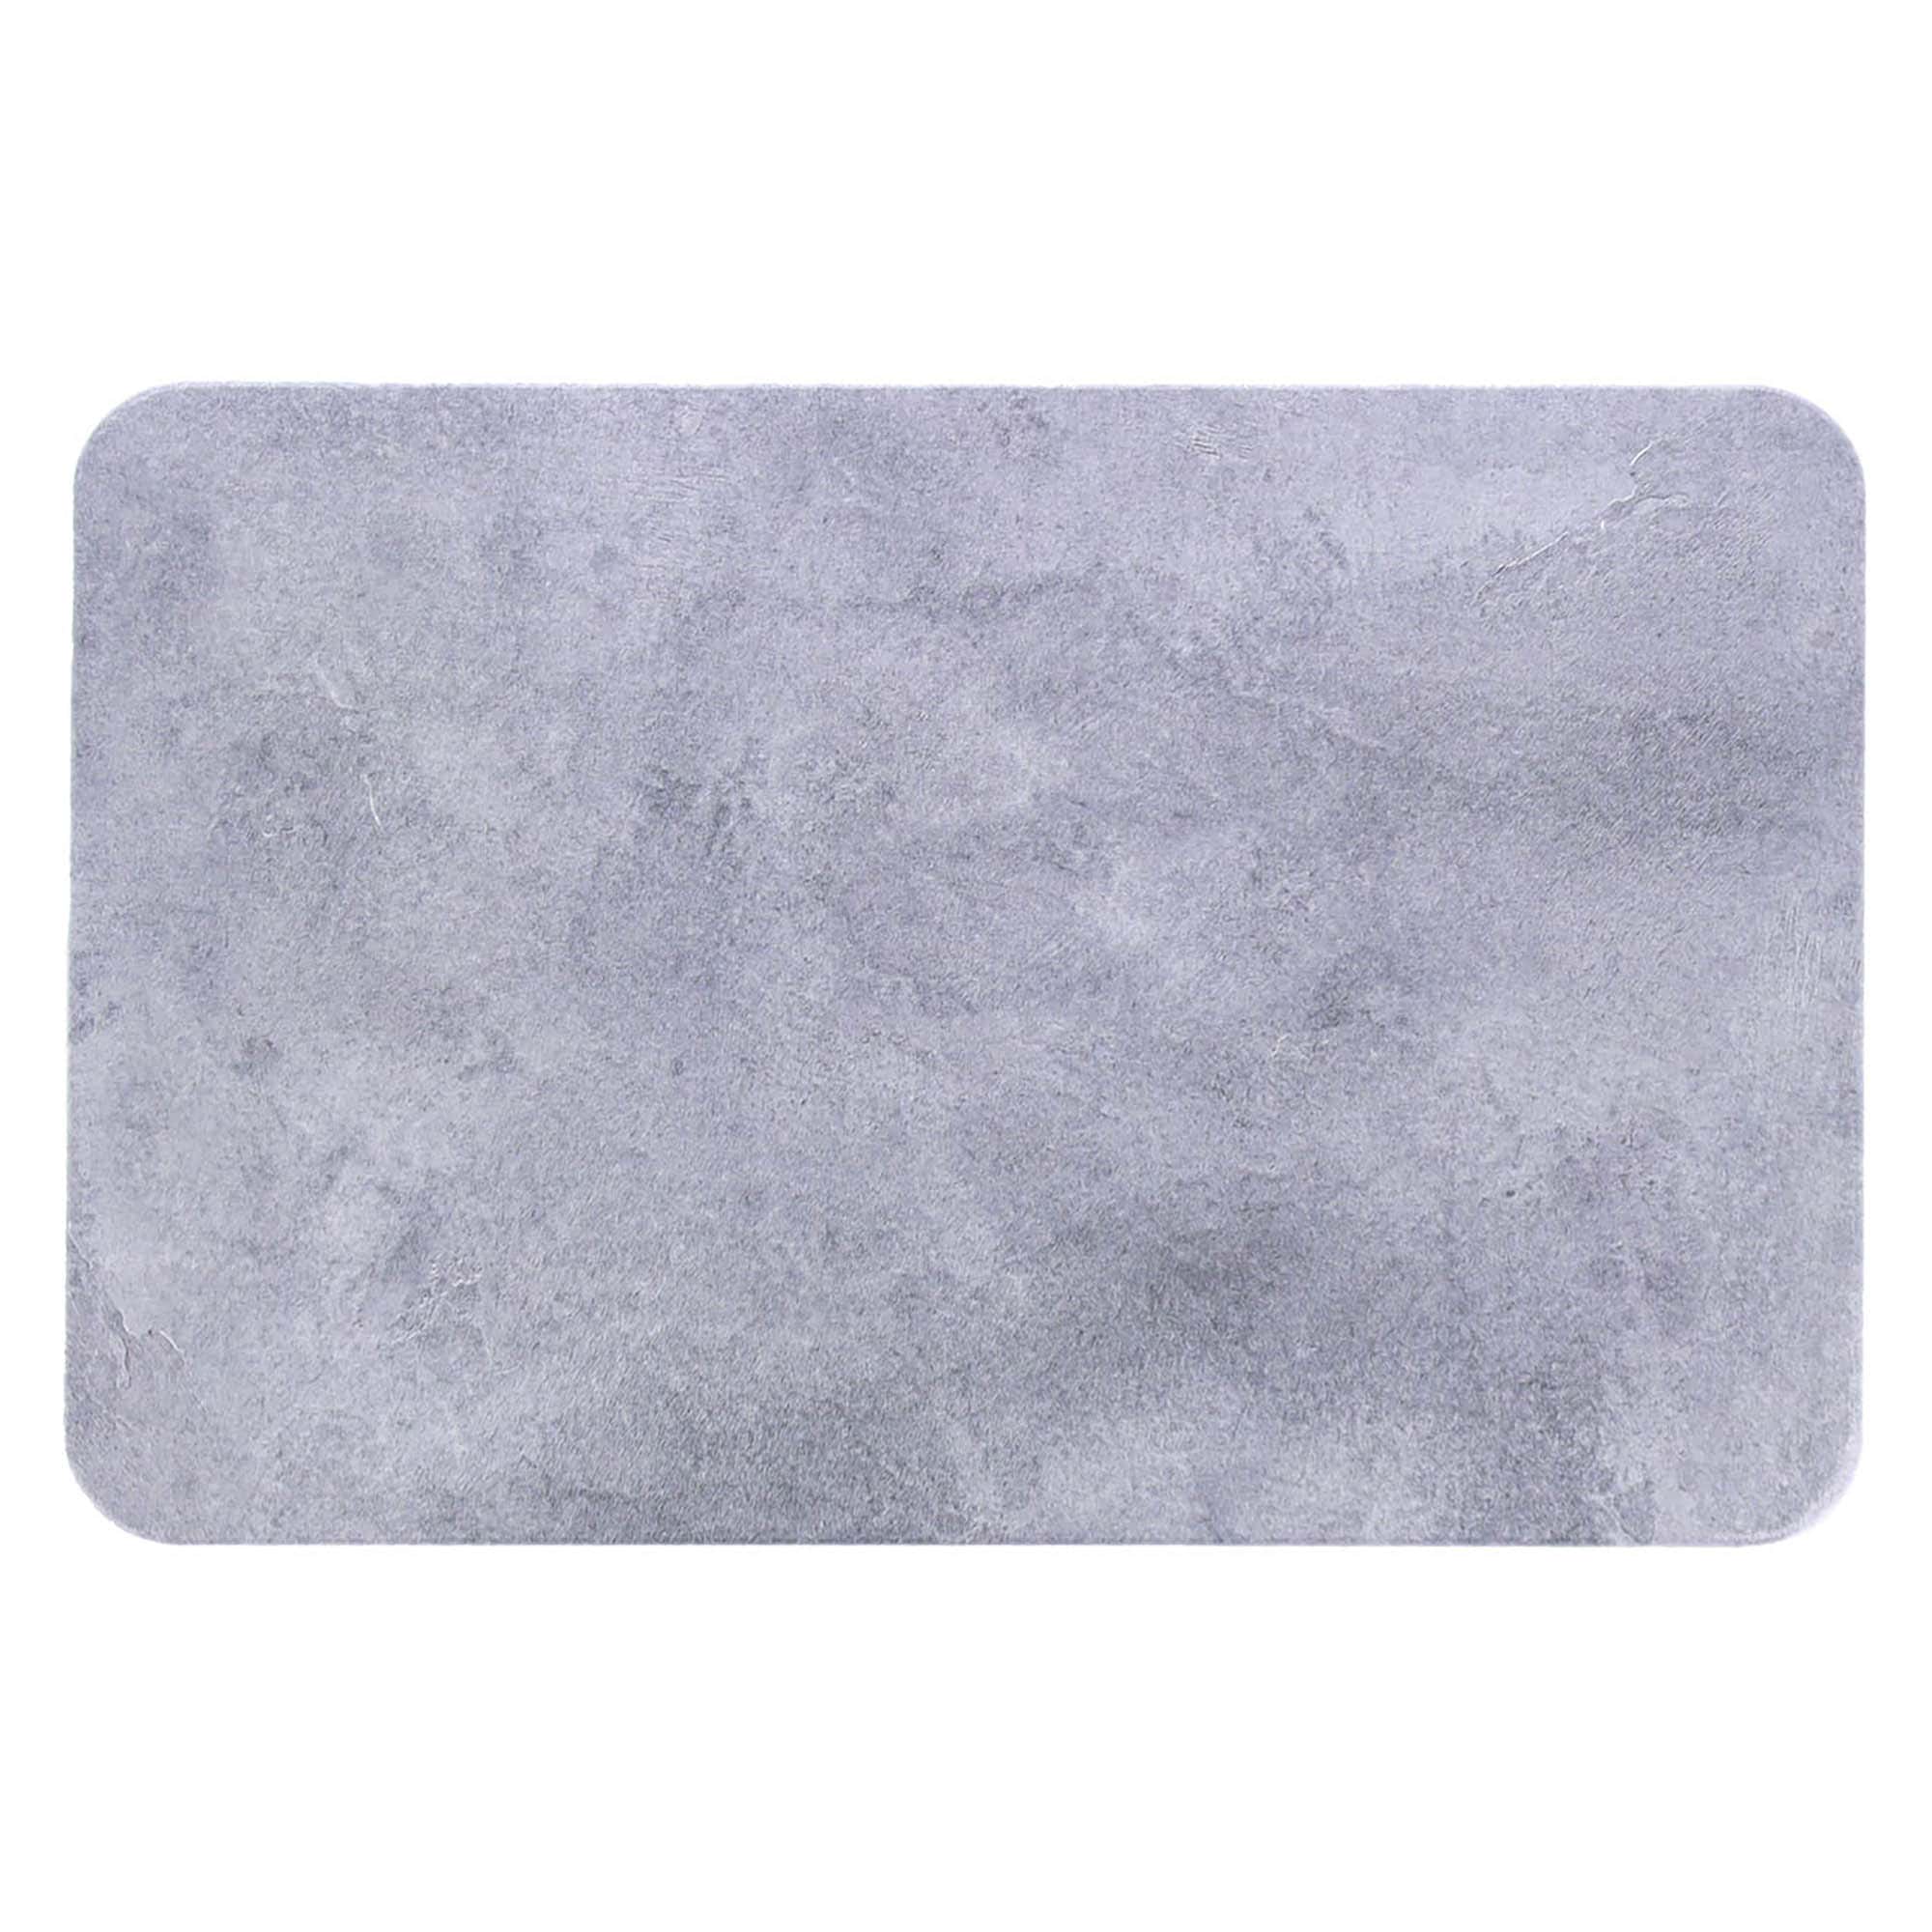 Close-up of a modern concrete-styled diatomite bath mat featuring gray shades